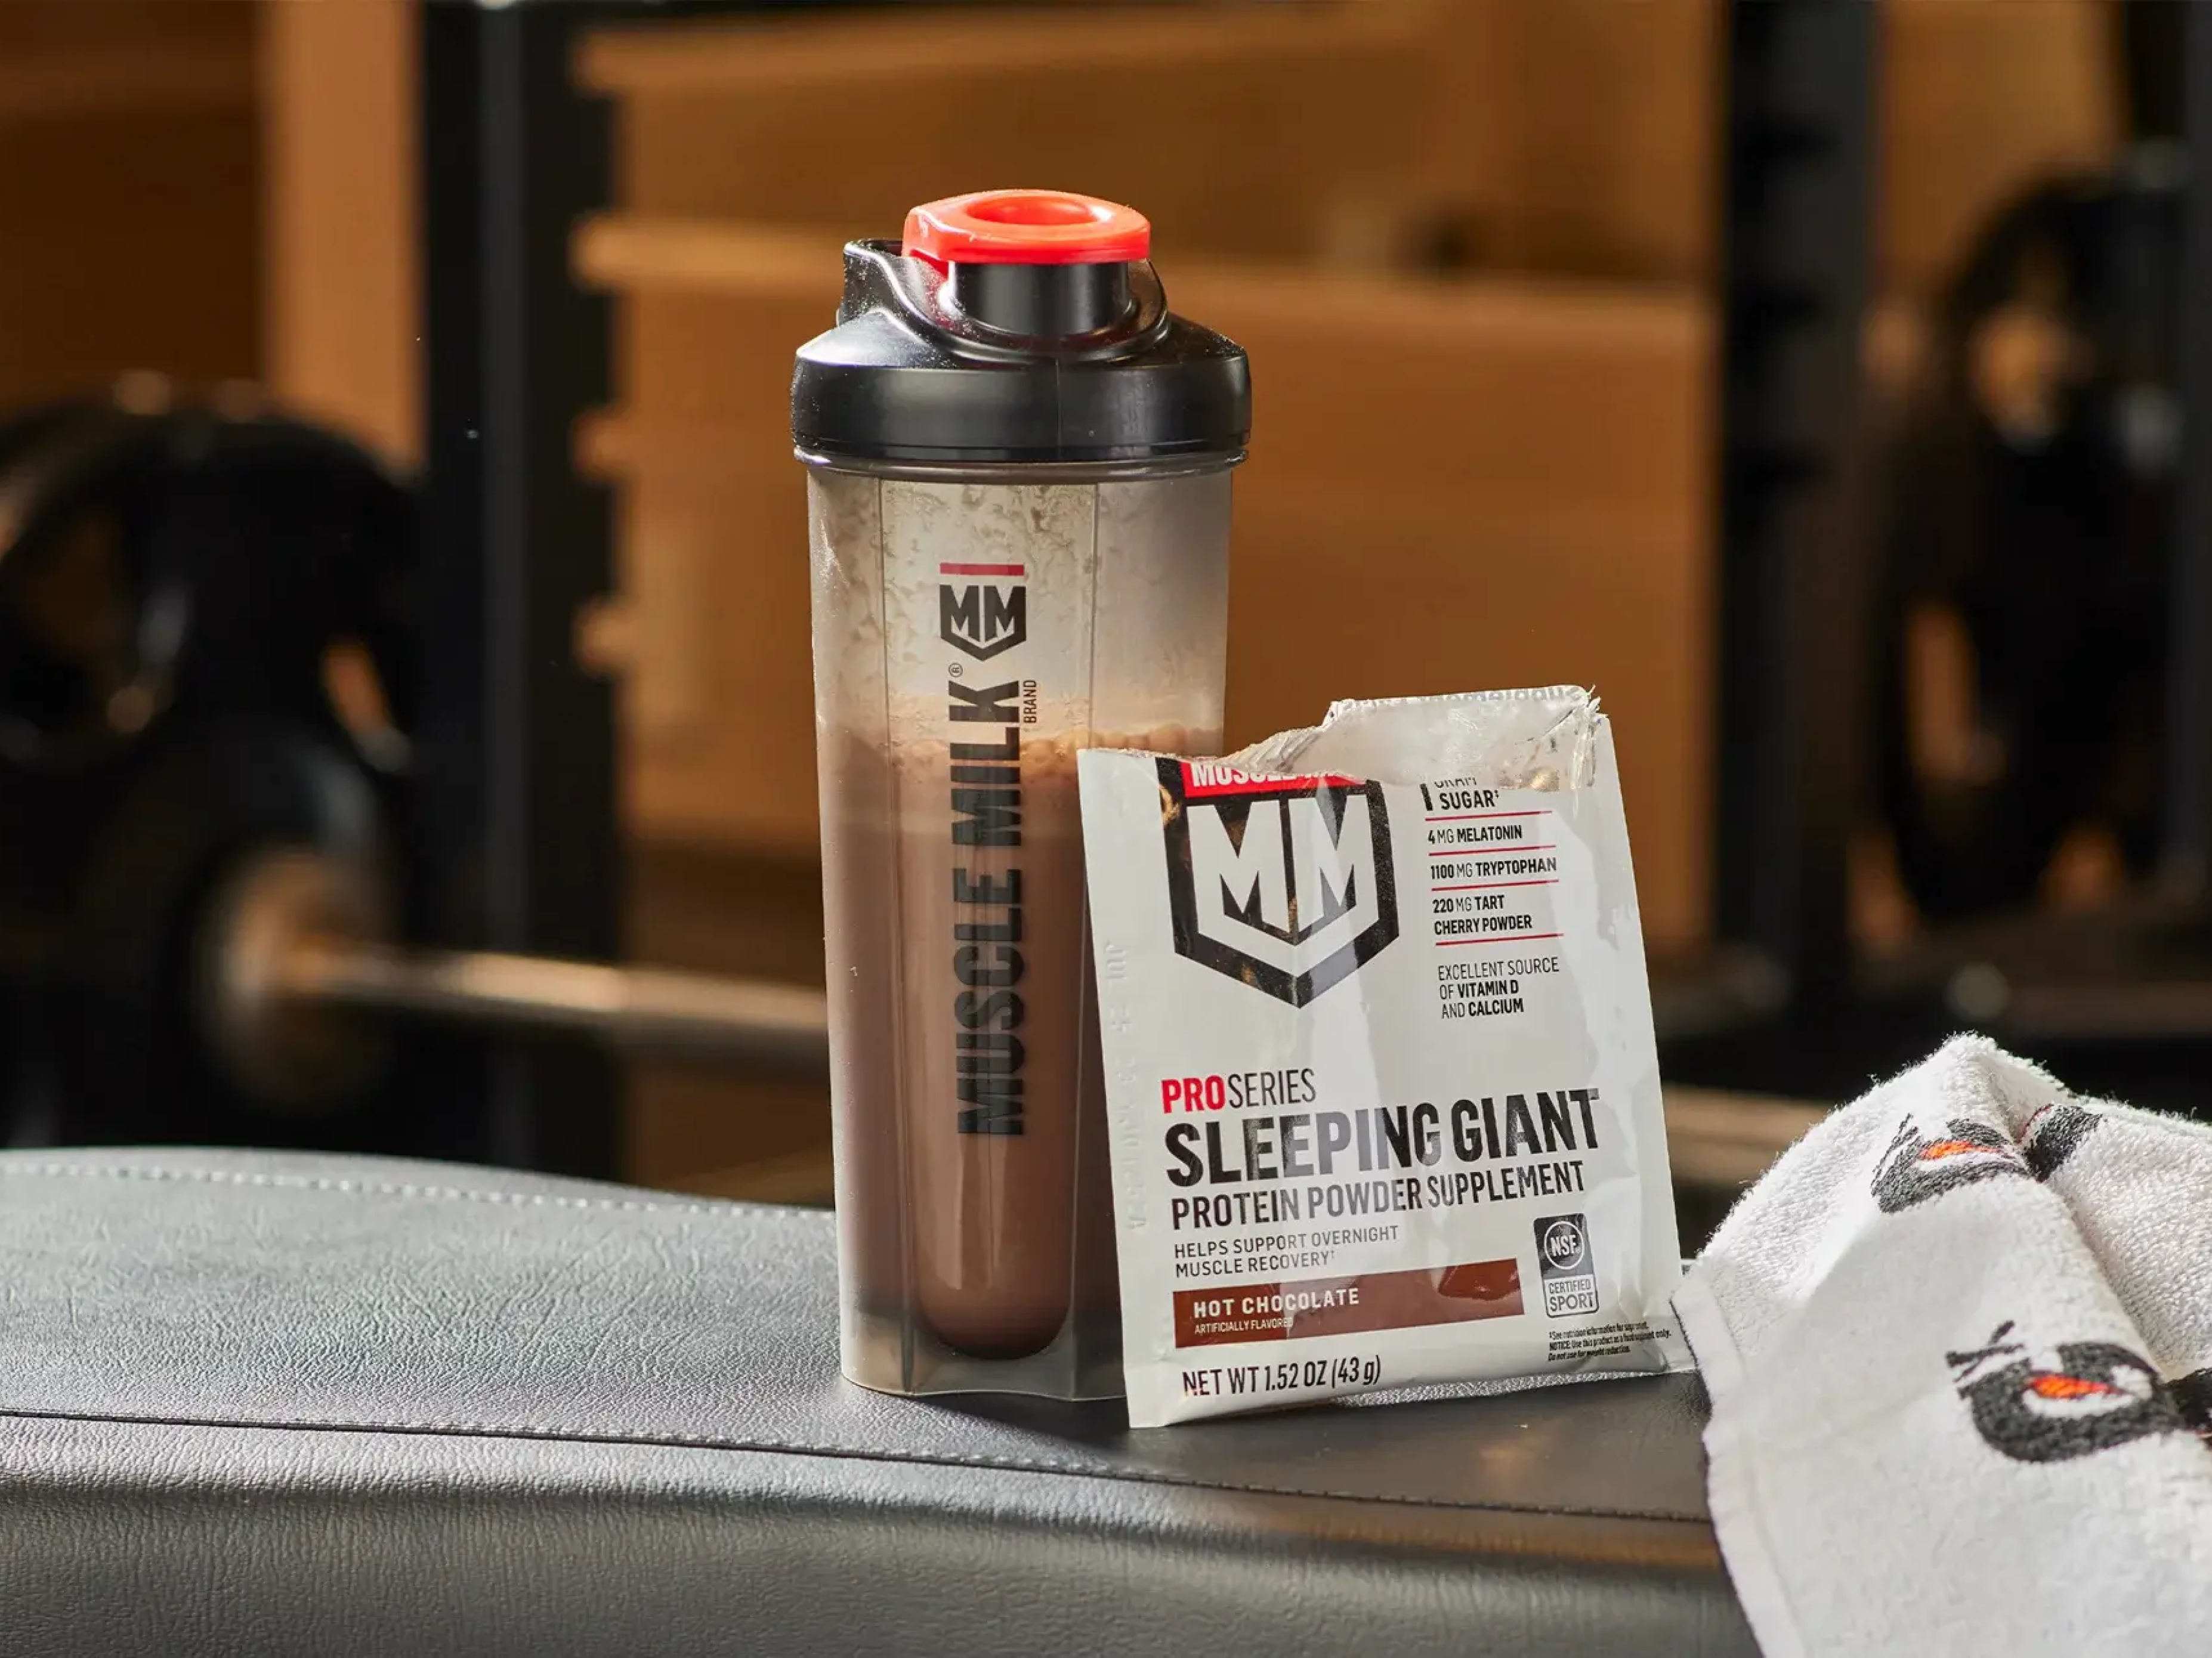 Muscle milk shaker bottle with sleeping giant protein